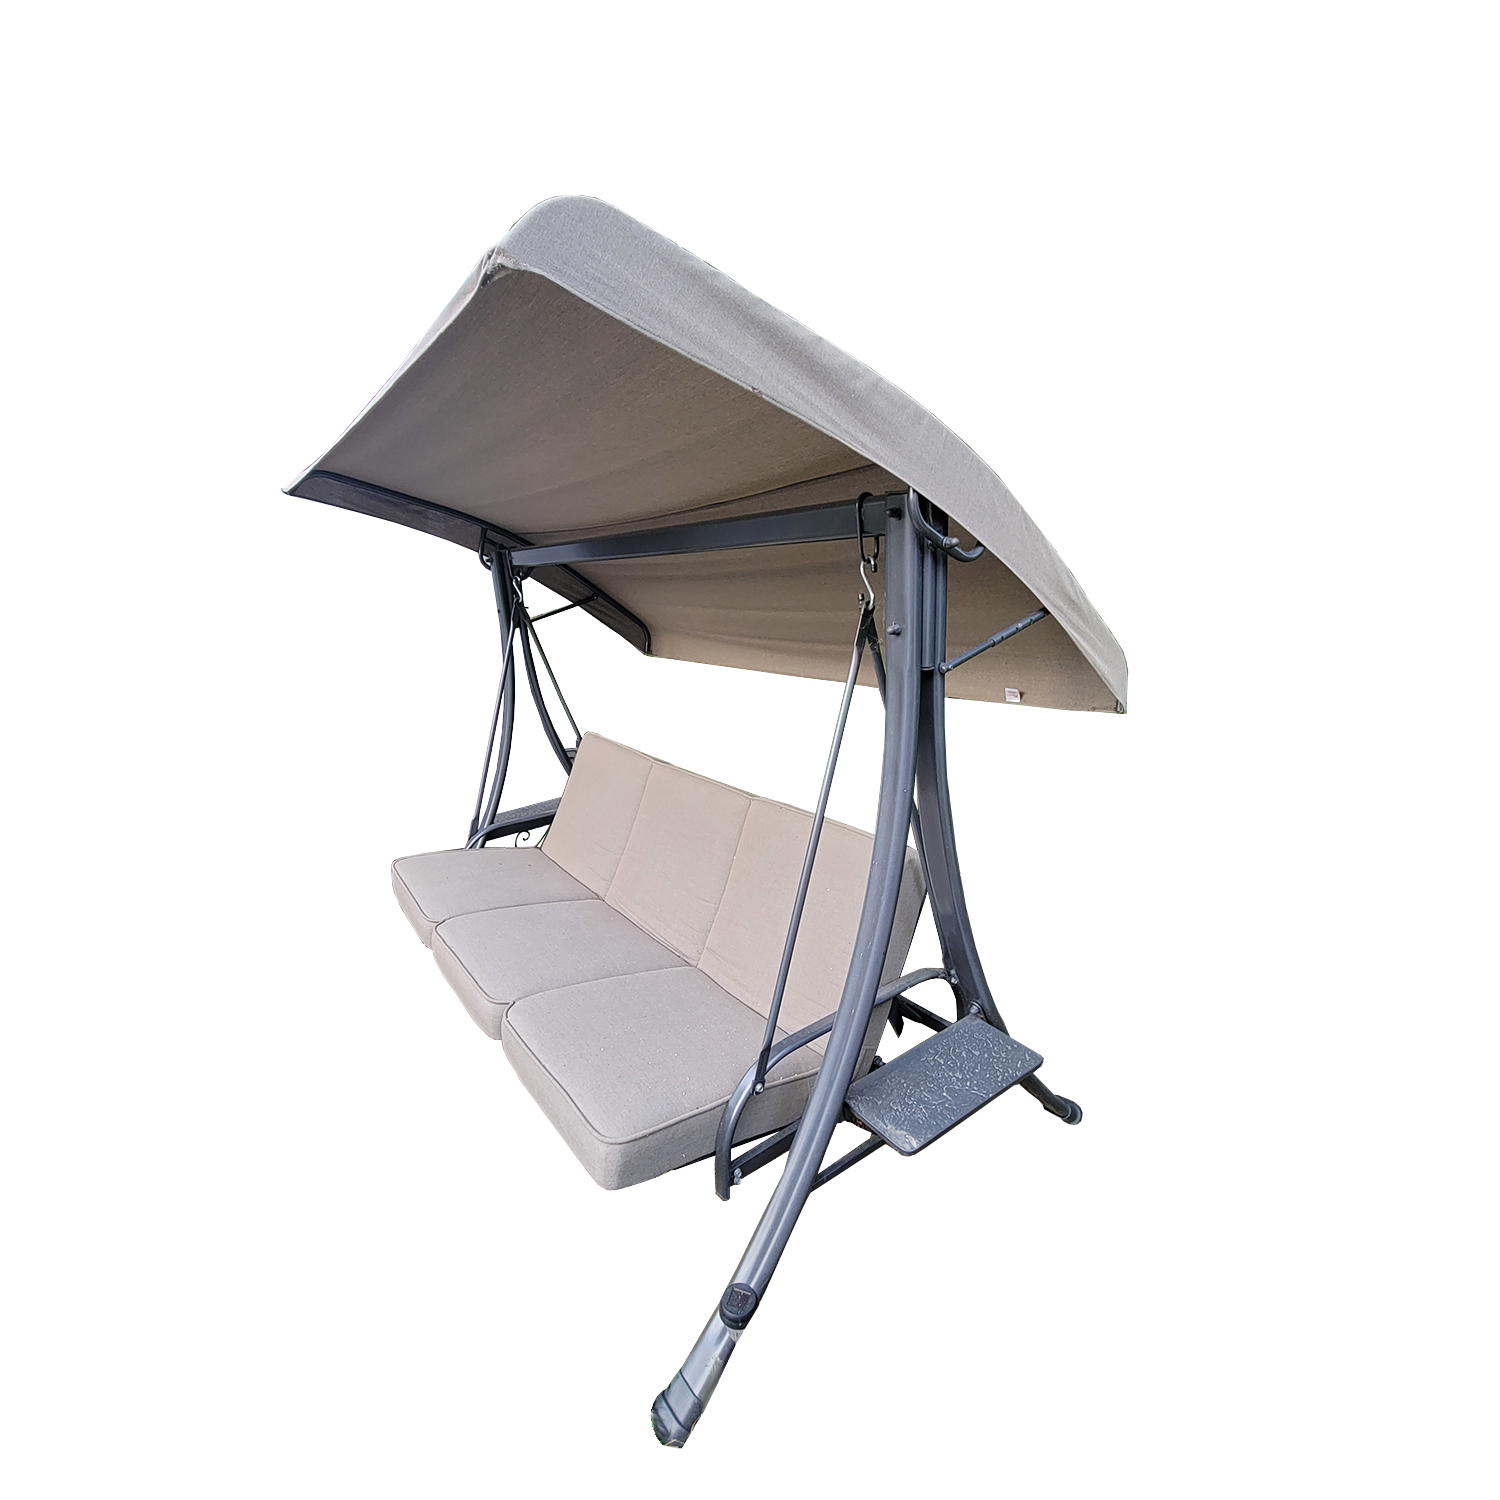 Replacement Canopy for 1900765 Costco Swing